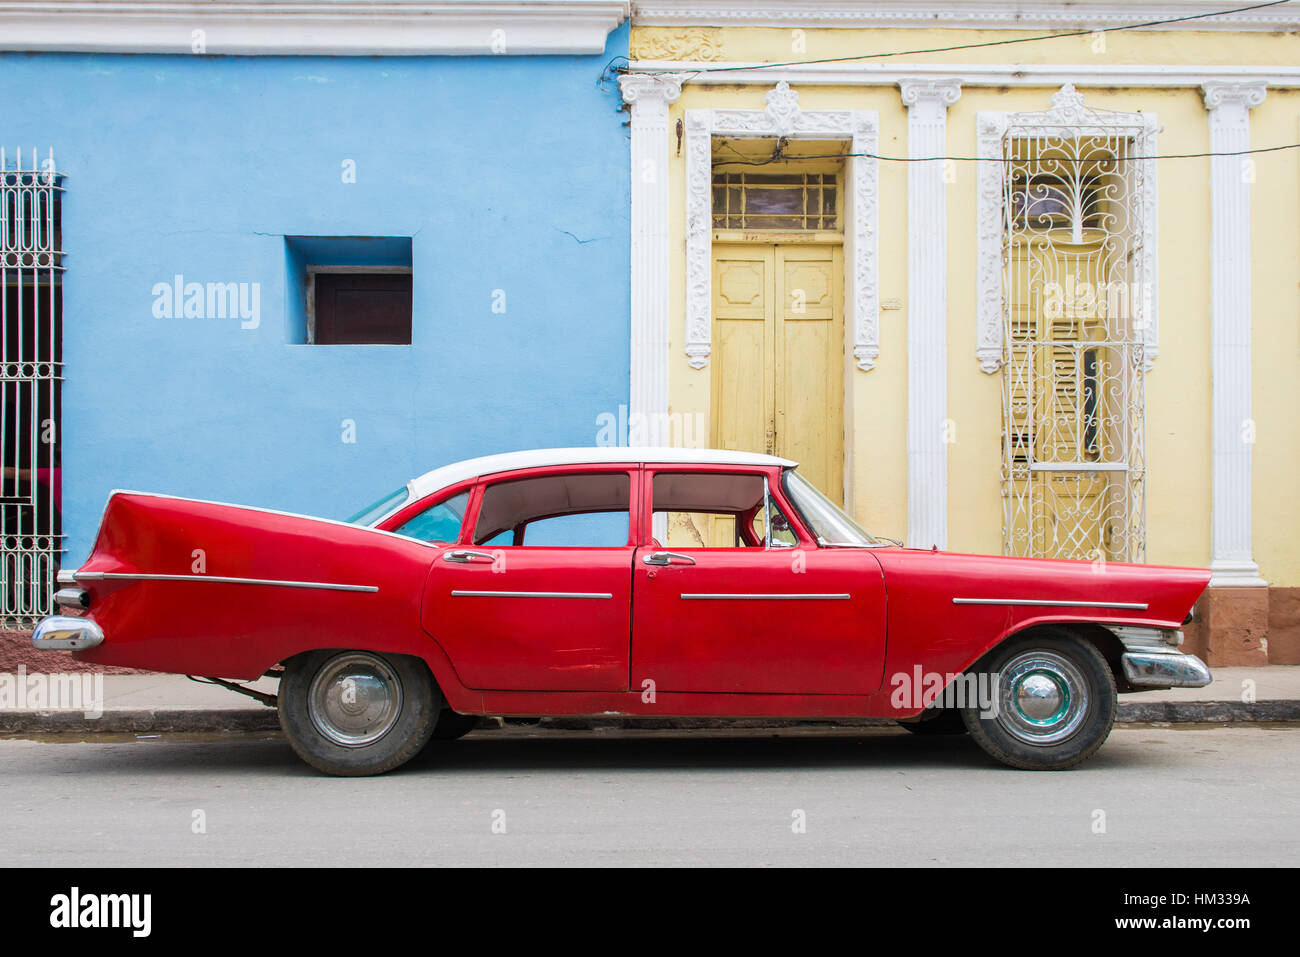 Classic American car parked in old town Trinidad, Cuba Stock Photo